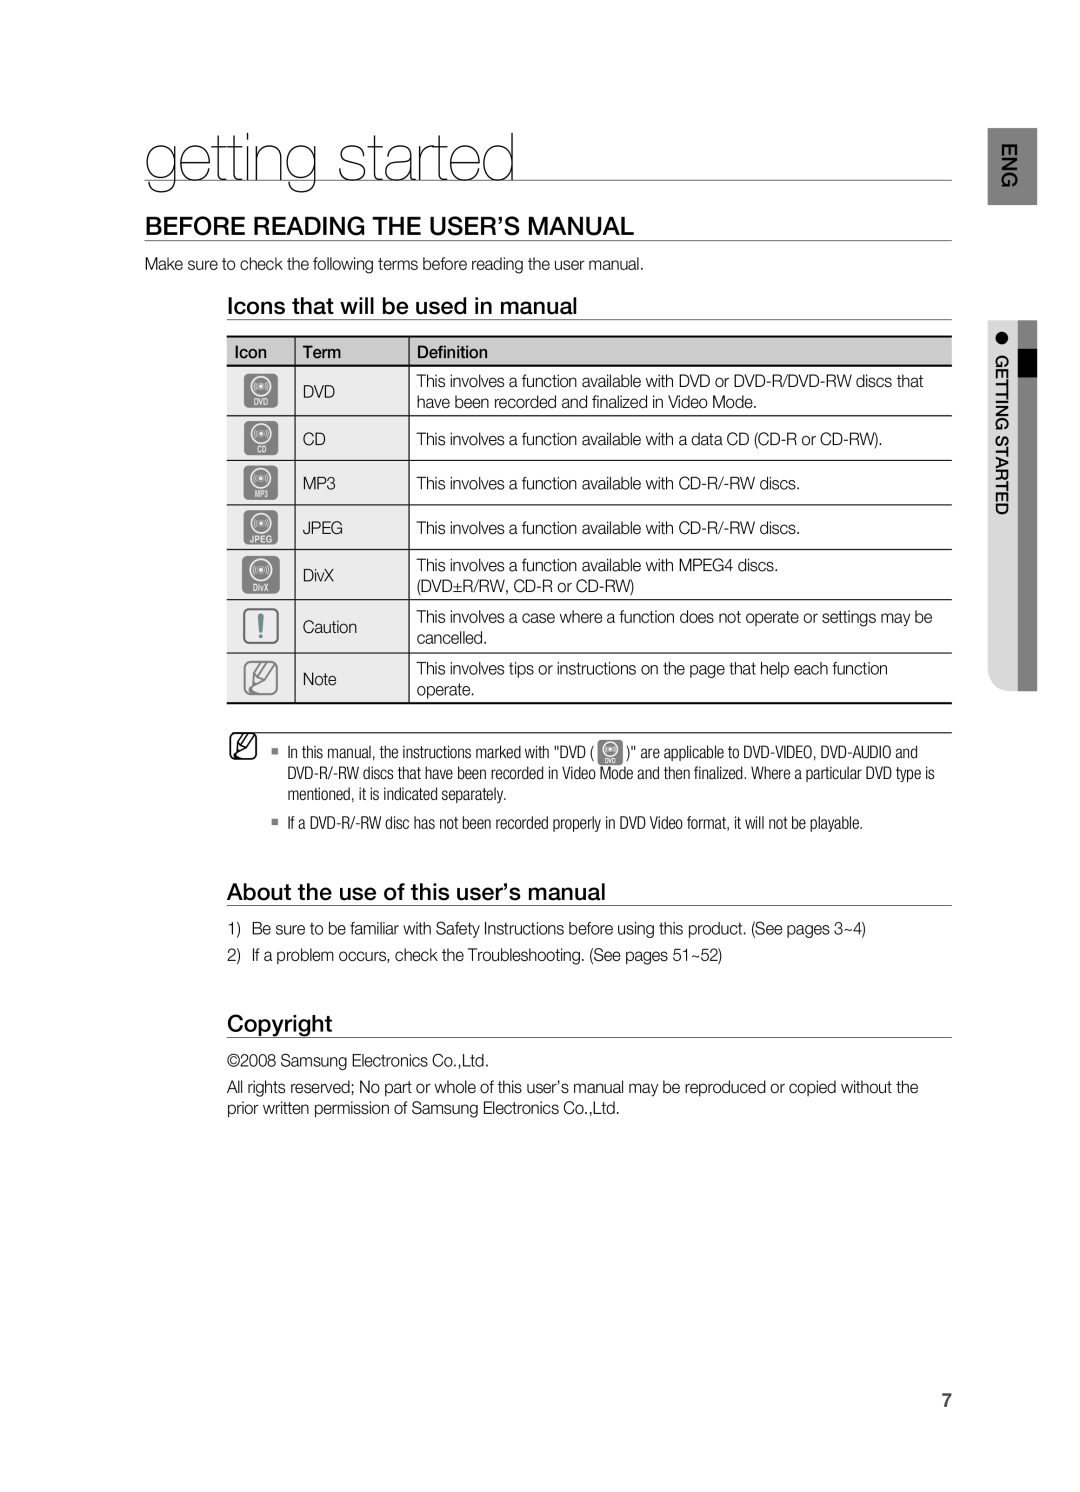 Samsung HT-A100 user manual getting started, Icons that will be used in manual, Copyright 